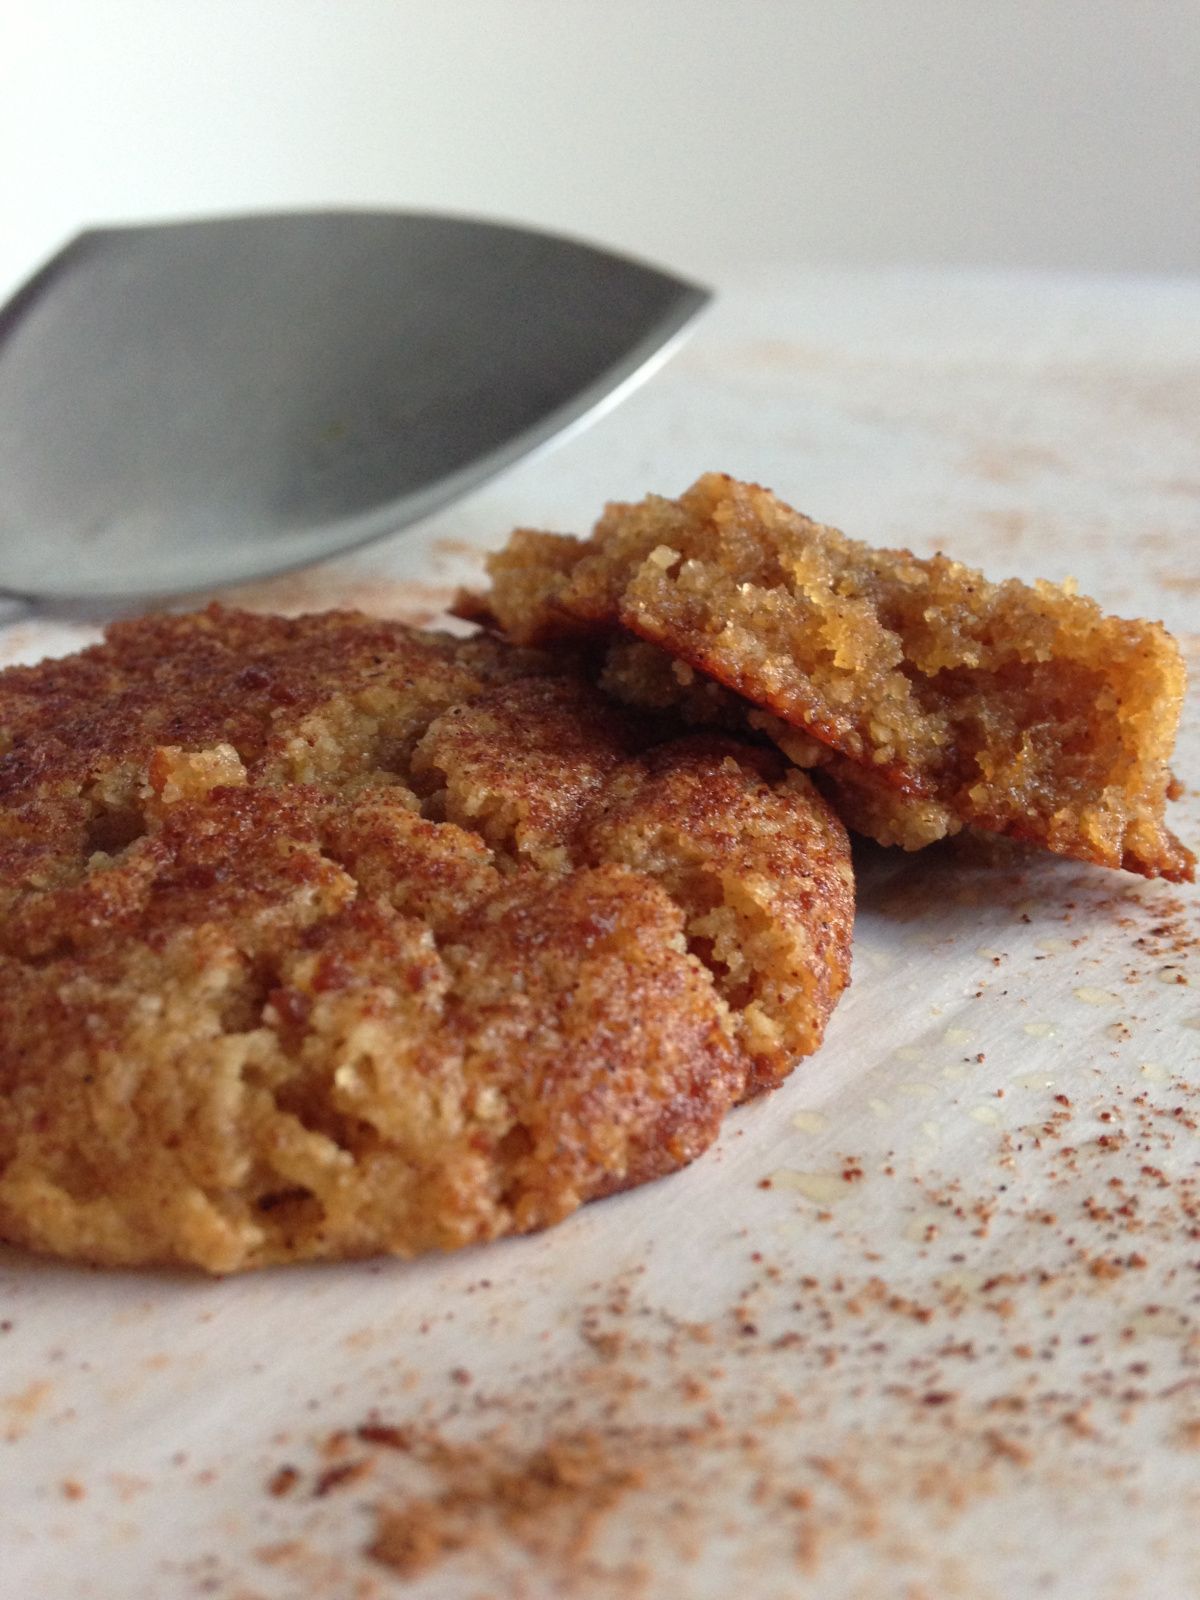 Paleo Browned Butter Snickerdrooldles. This looks better than the other snicker